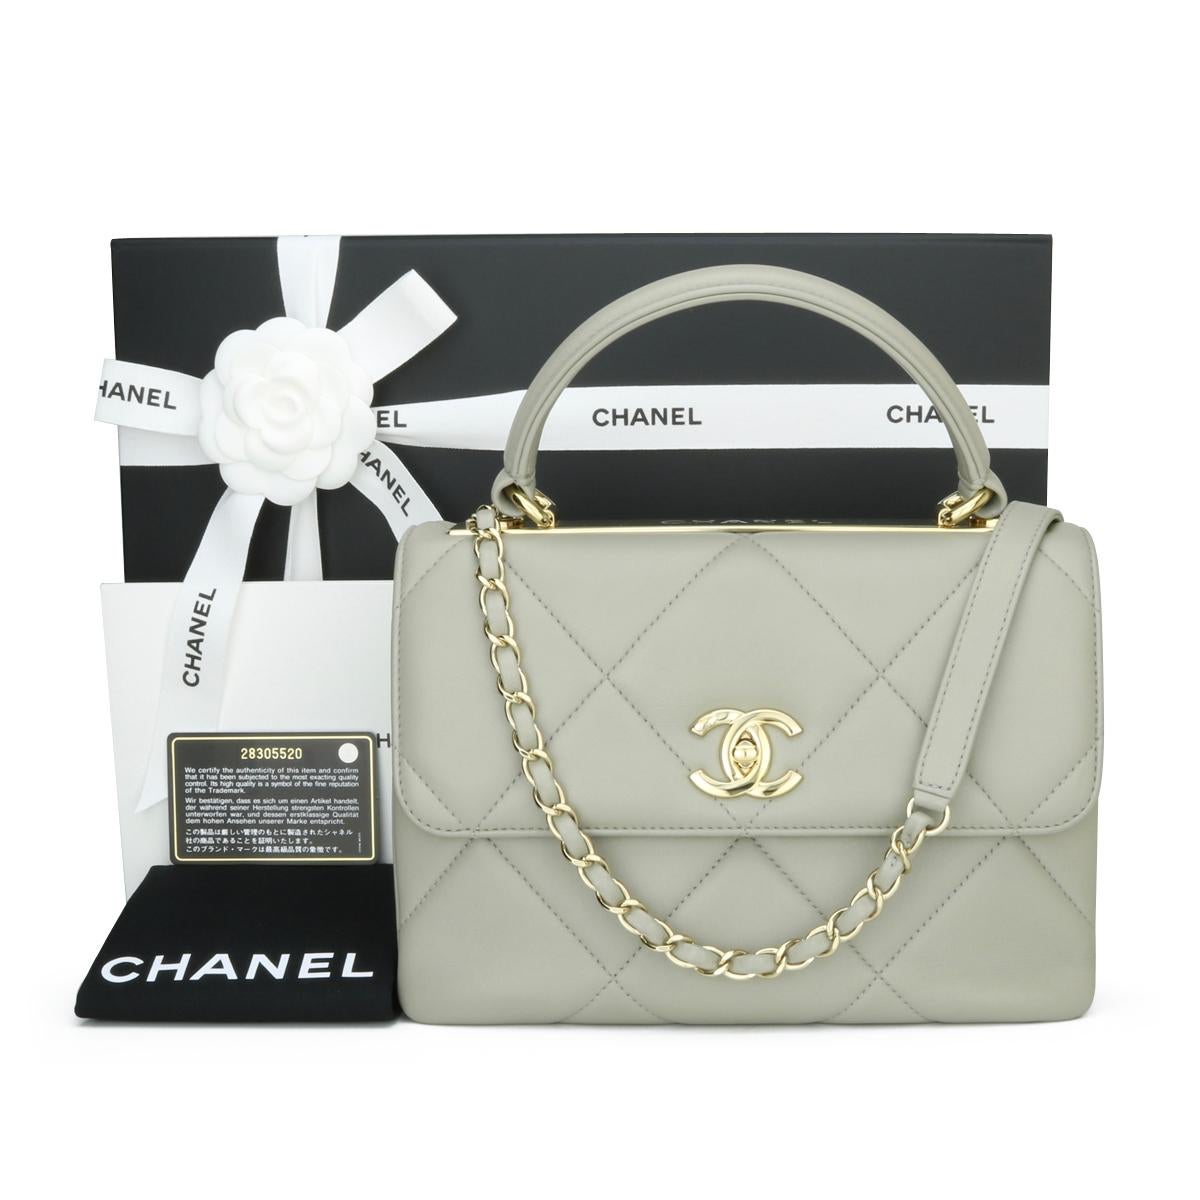 CHANEL Trendy CC Top Handle Small Bag Large Quilt Grey Lambskin with Light Gold Hardware 2019.

This stunning bag is in excellent condition, the bag still holds its shape very well, and the hardware is still very shiny.

This top handle bag is